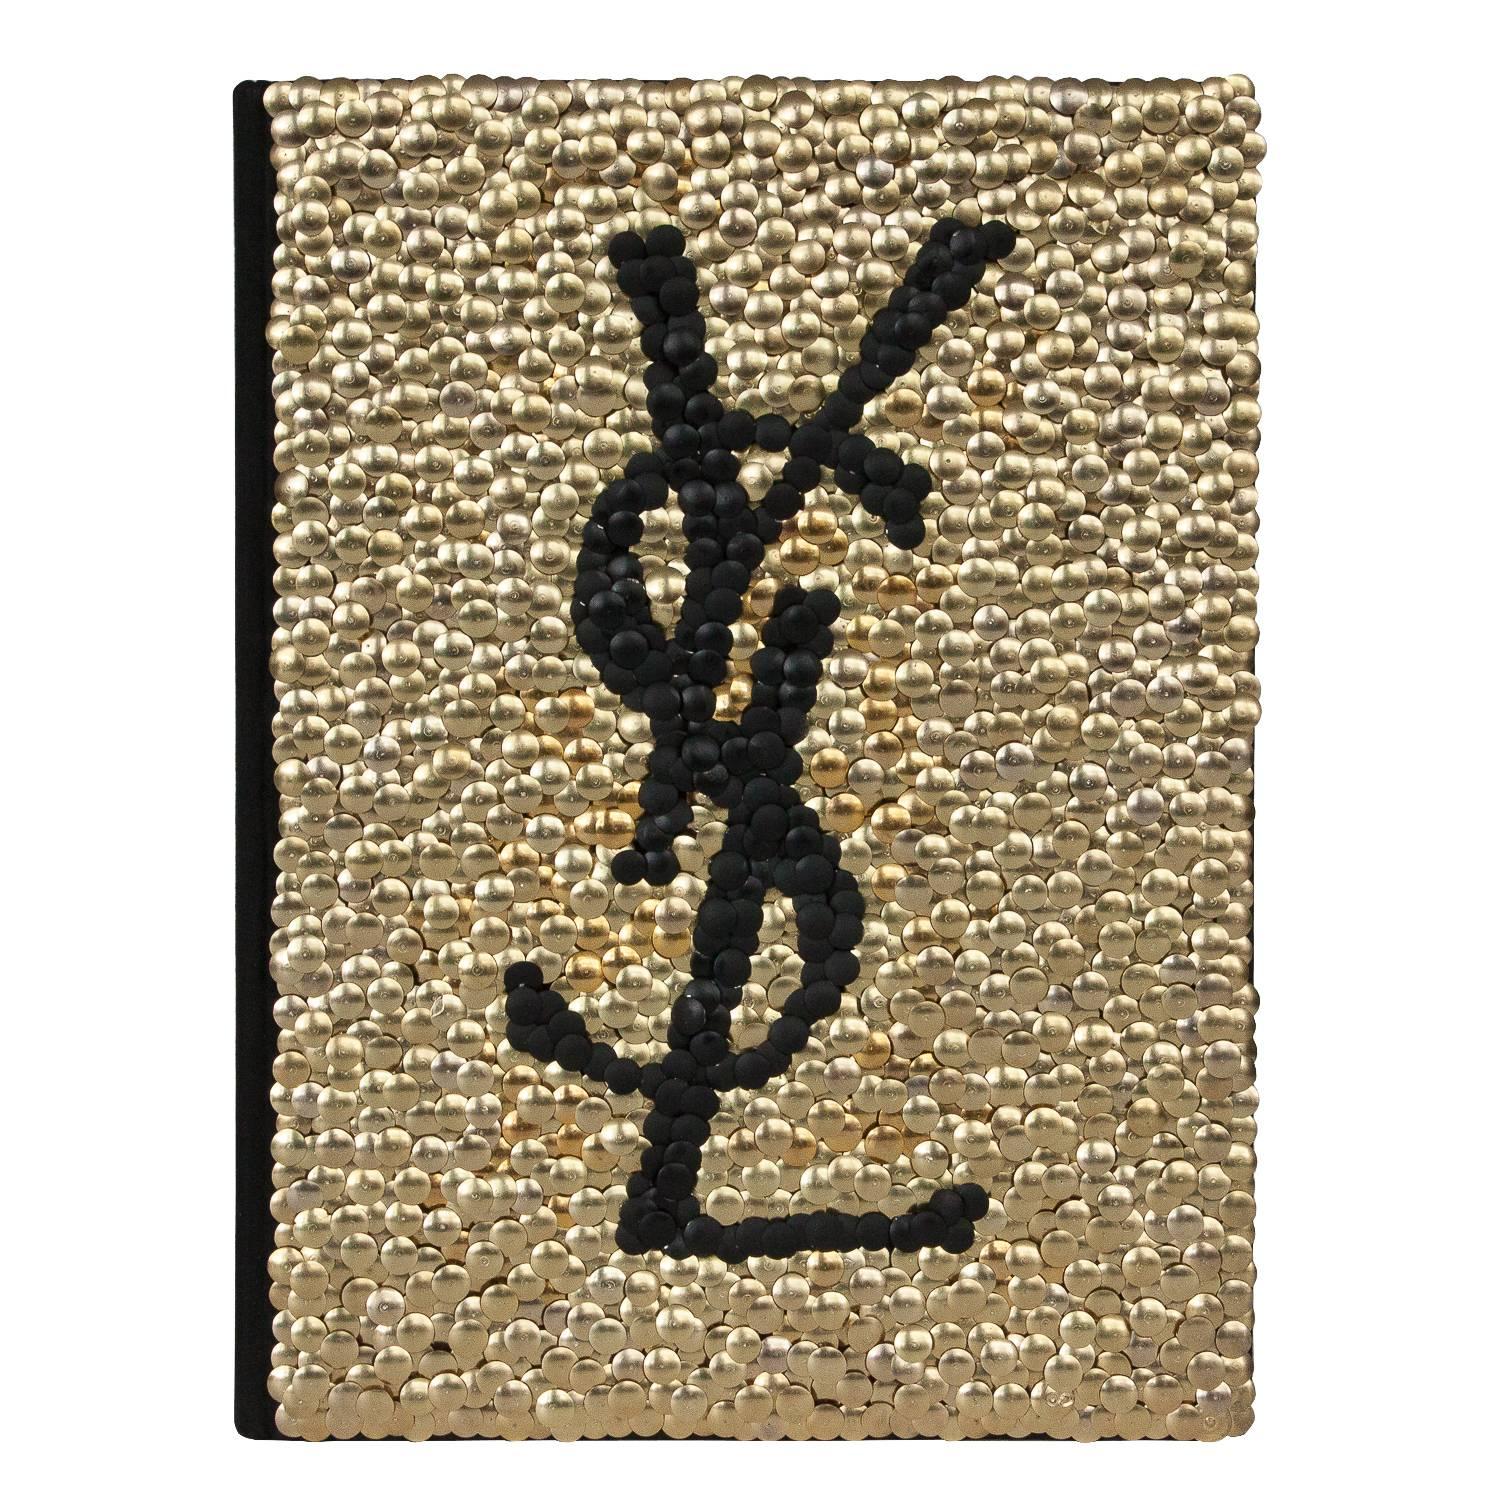 Brass Adorned Yves Saint Laurent Fashion Book by Brian Stanziale